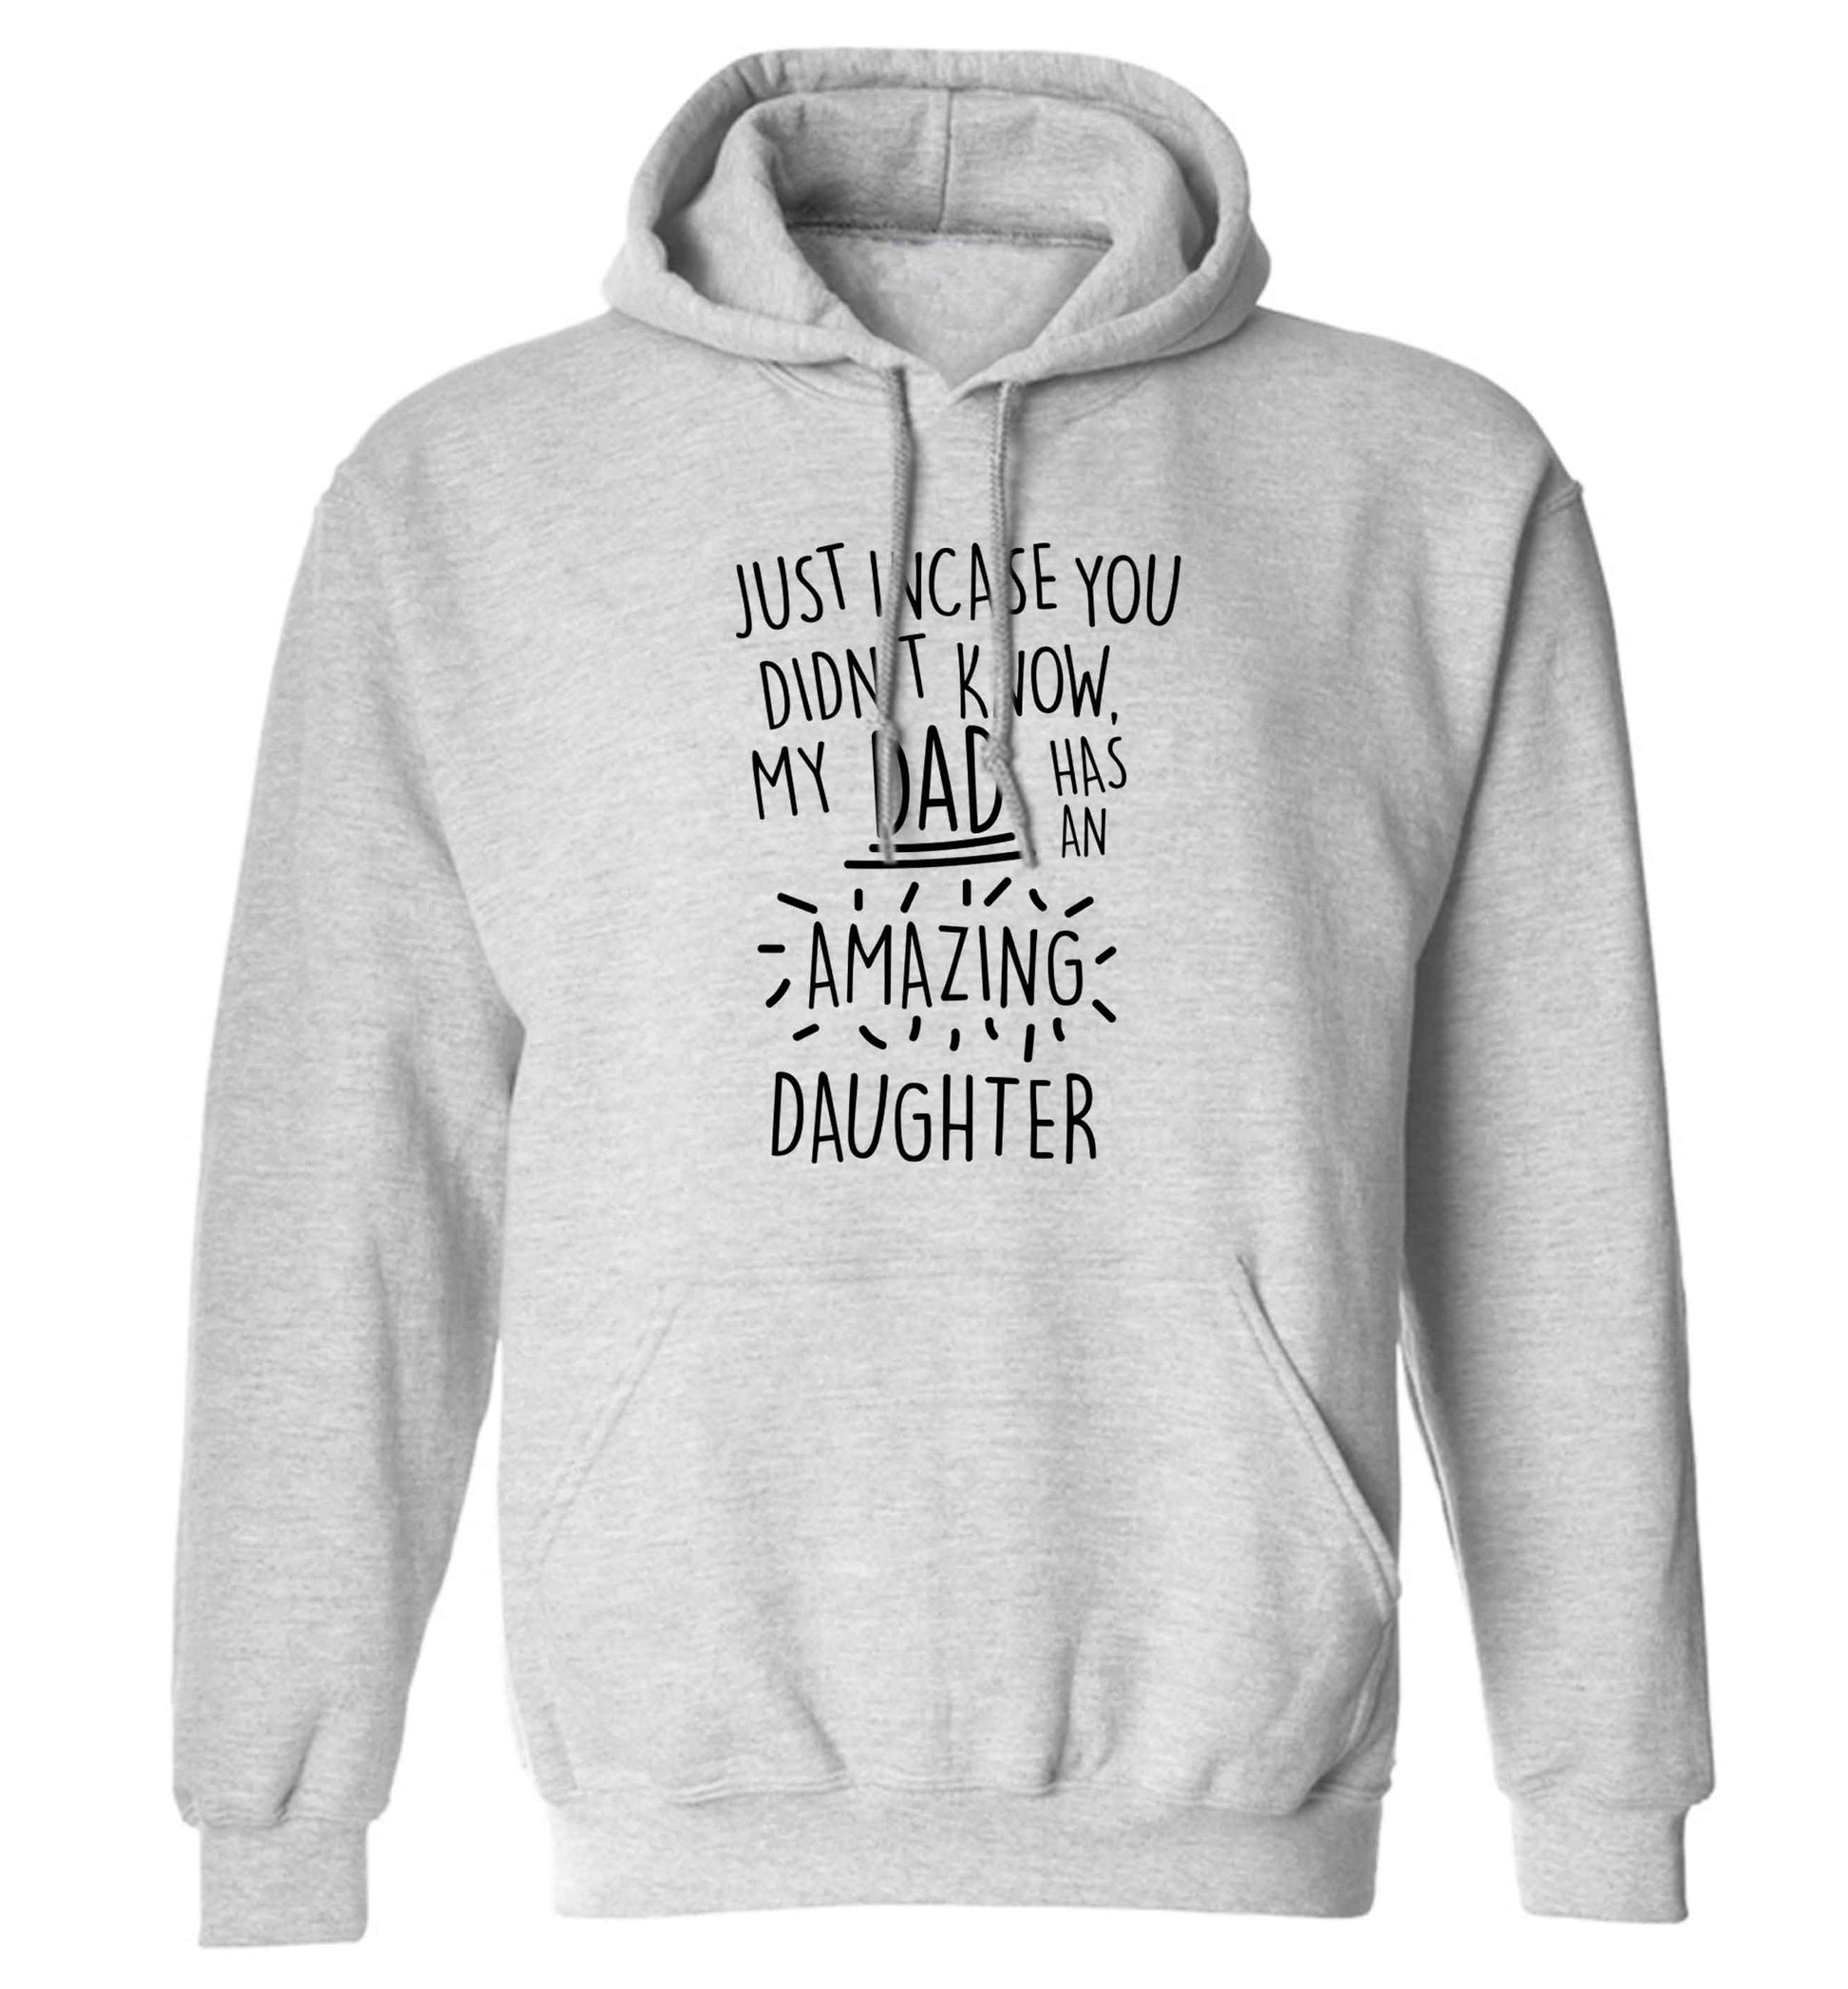 Just incase you didn't know my dad has an amazing daughter adults unisex grey hoodie 2XL